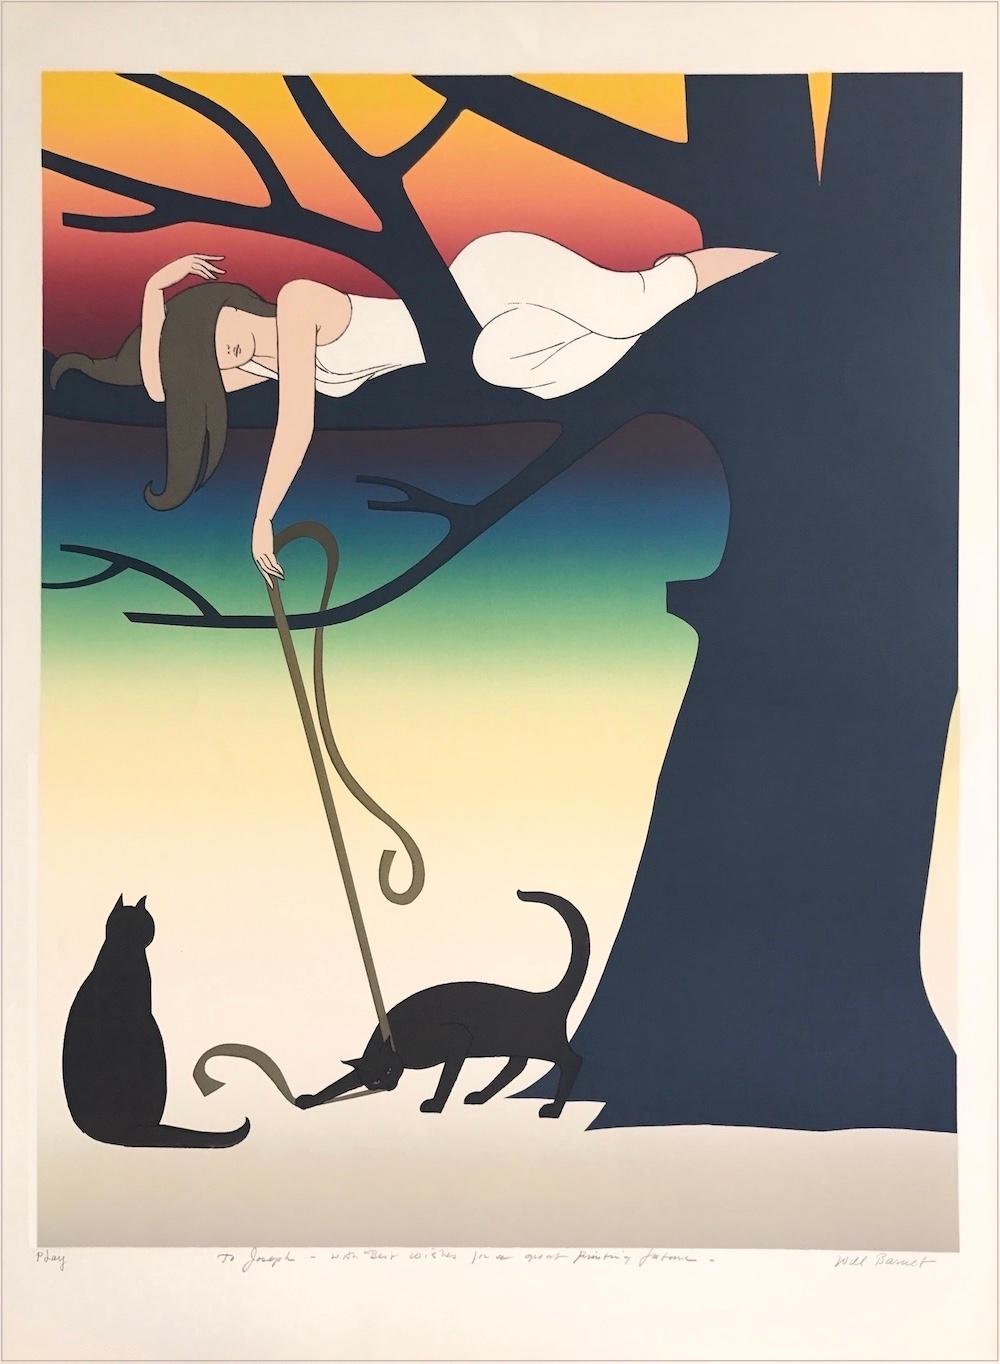 Will Barnet Portrait Print - PLAY Signed Lithograph, Young Woman In Tree Playing with Cats, Rainbow Sunset